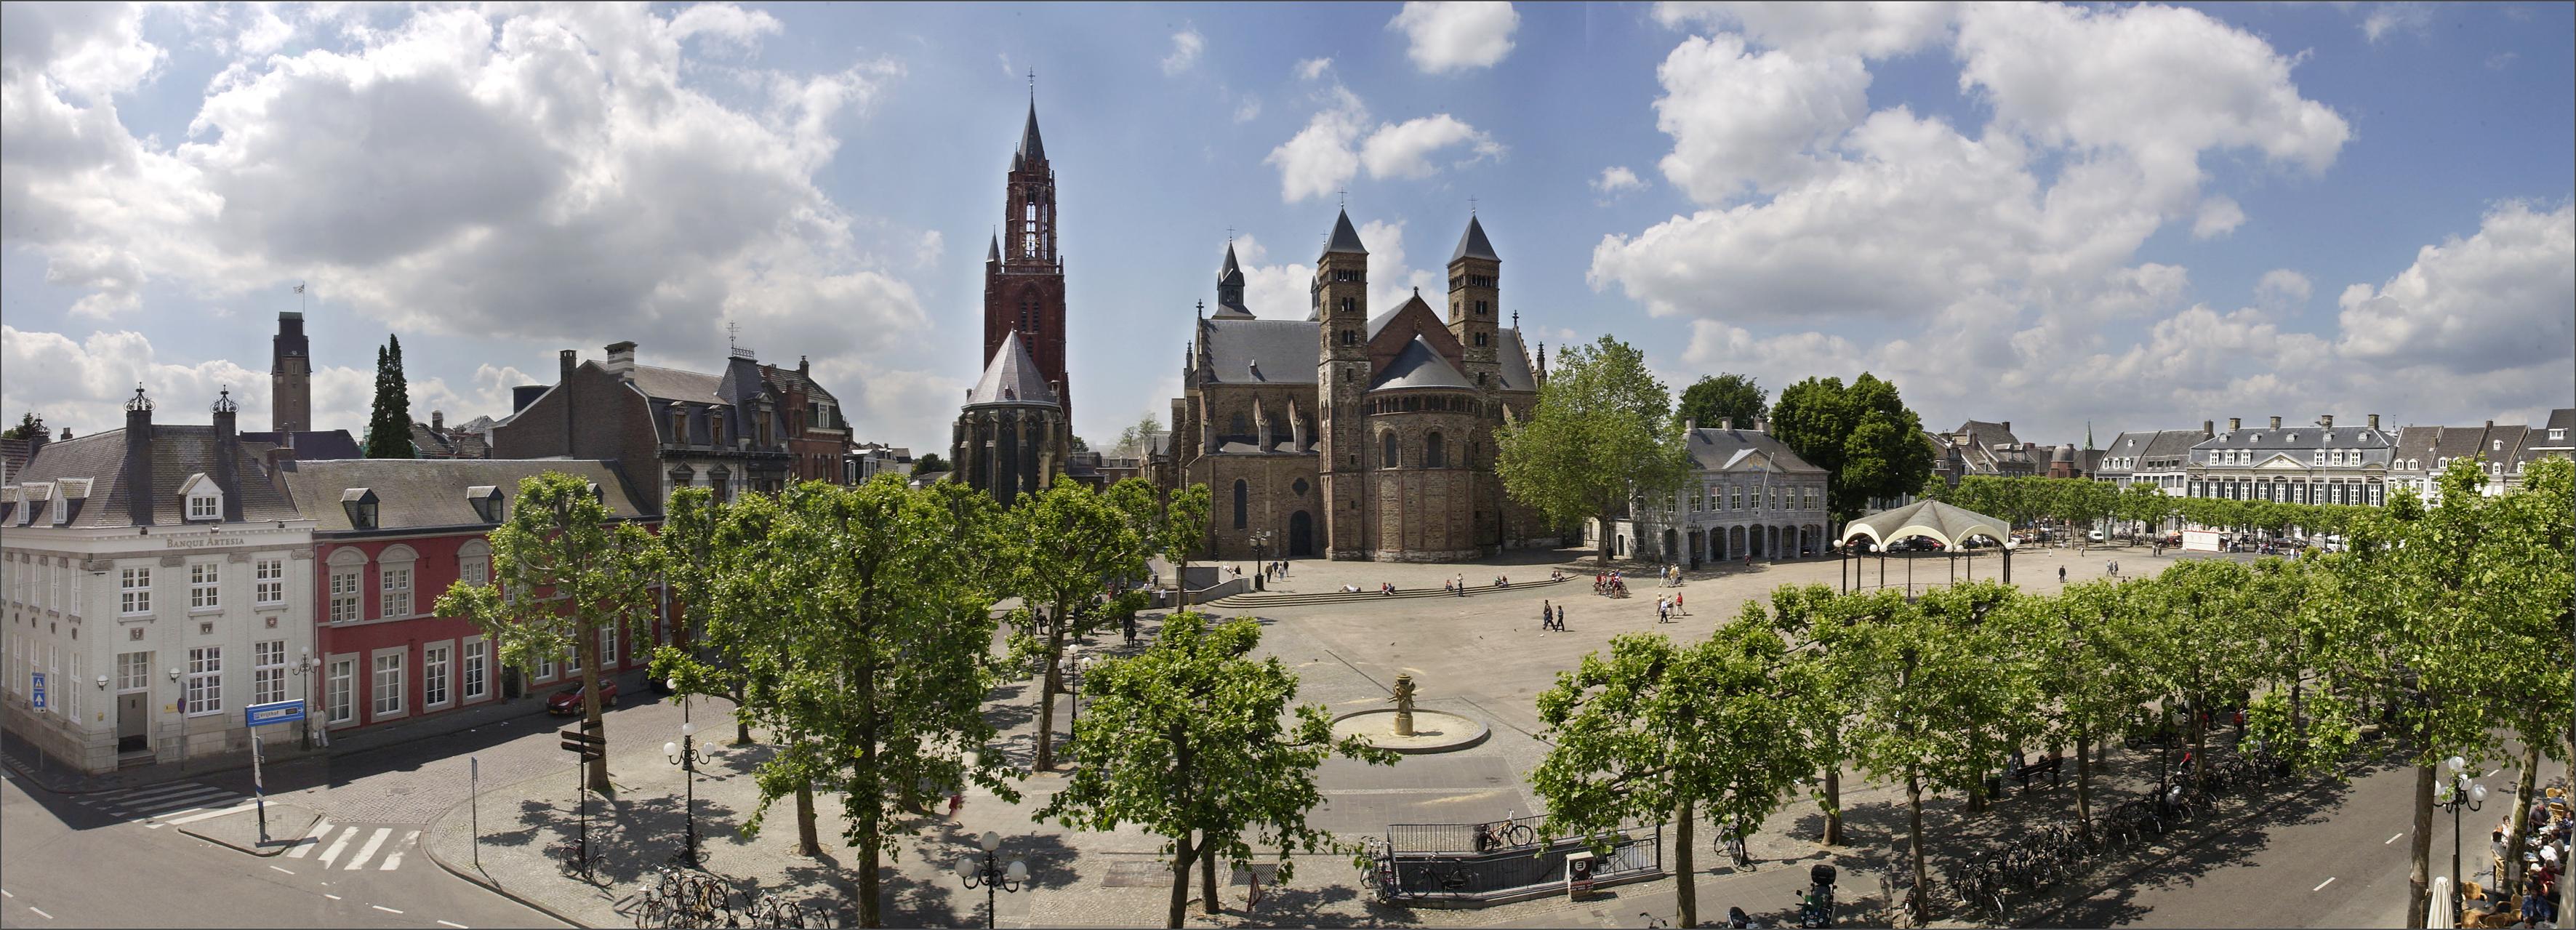 Holiday in Maastricht